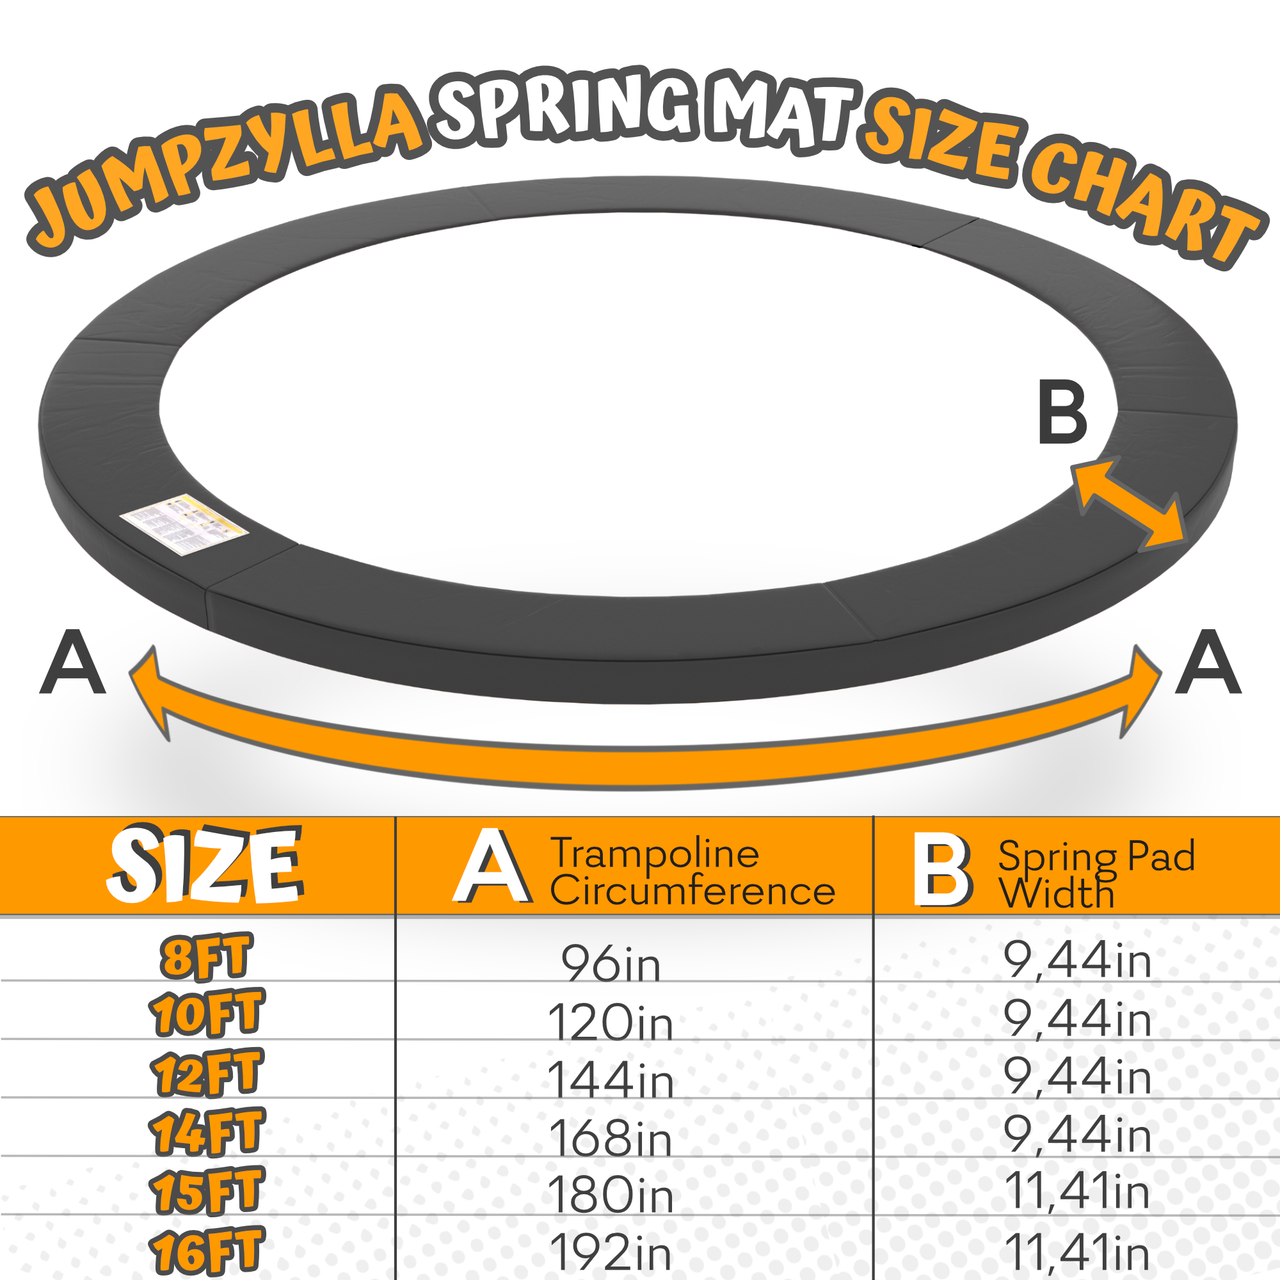 [NEW] Jumpzylla Double Sided Spring Cover Pads for 12FT Trampolines